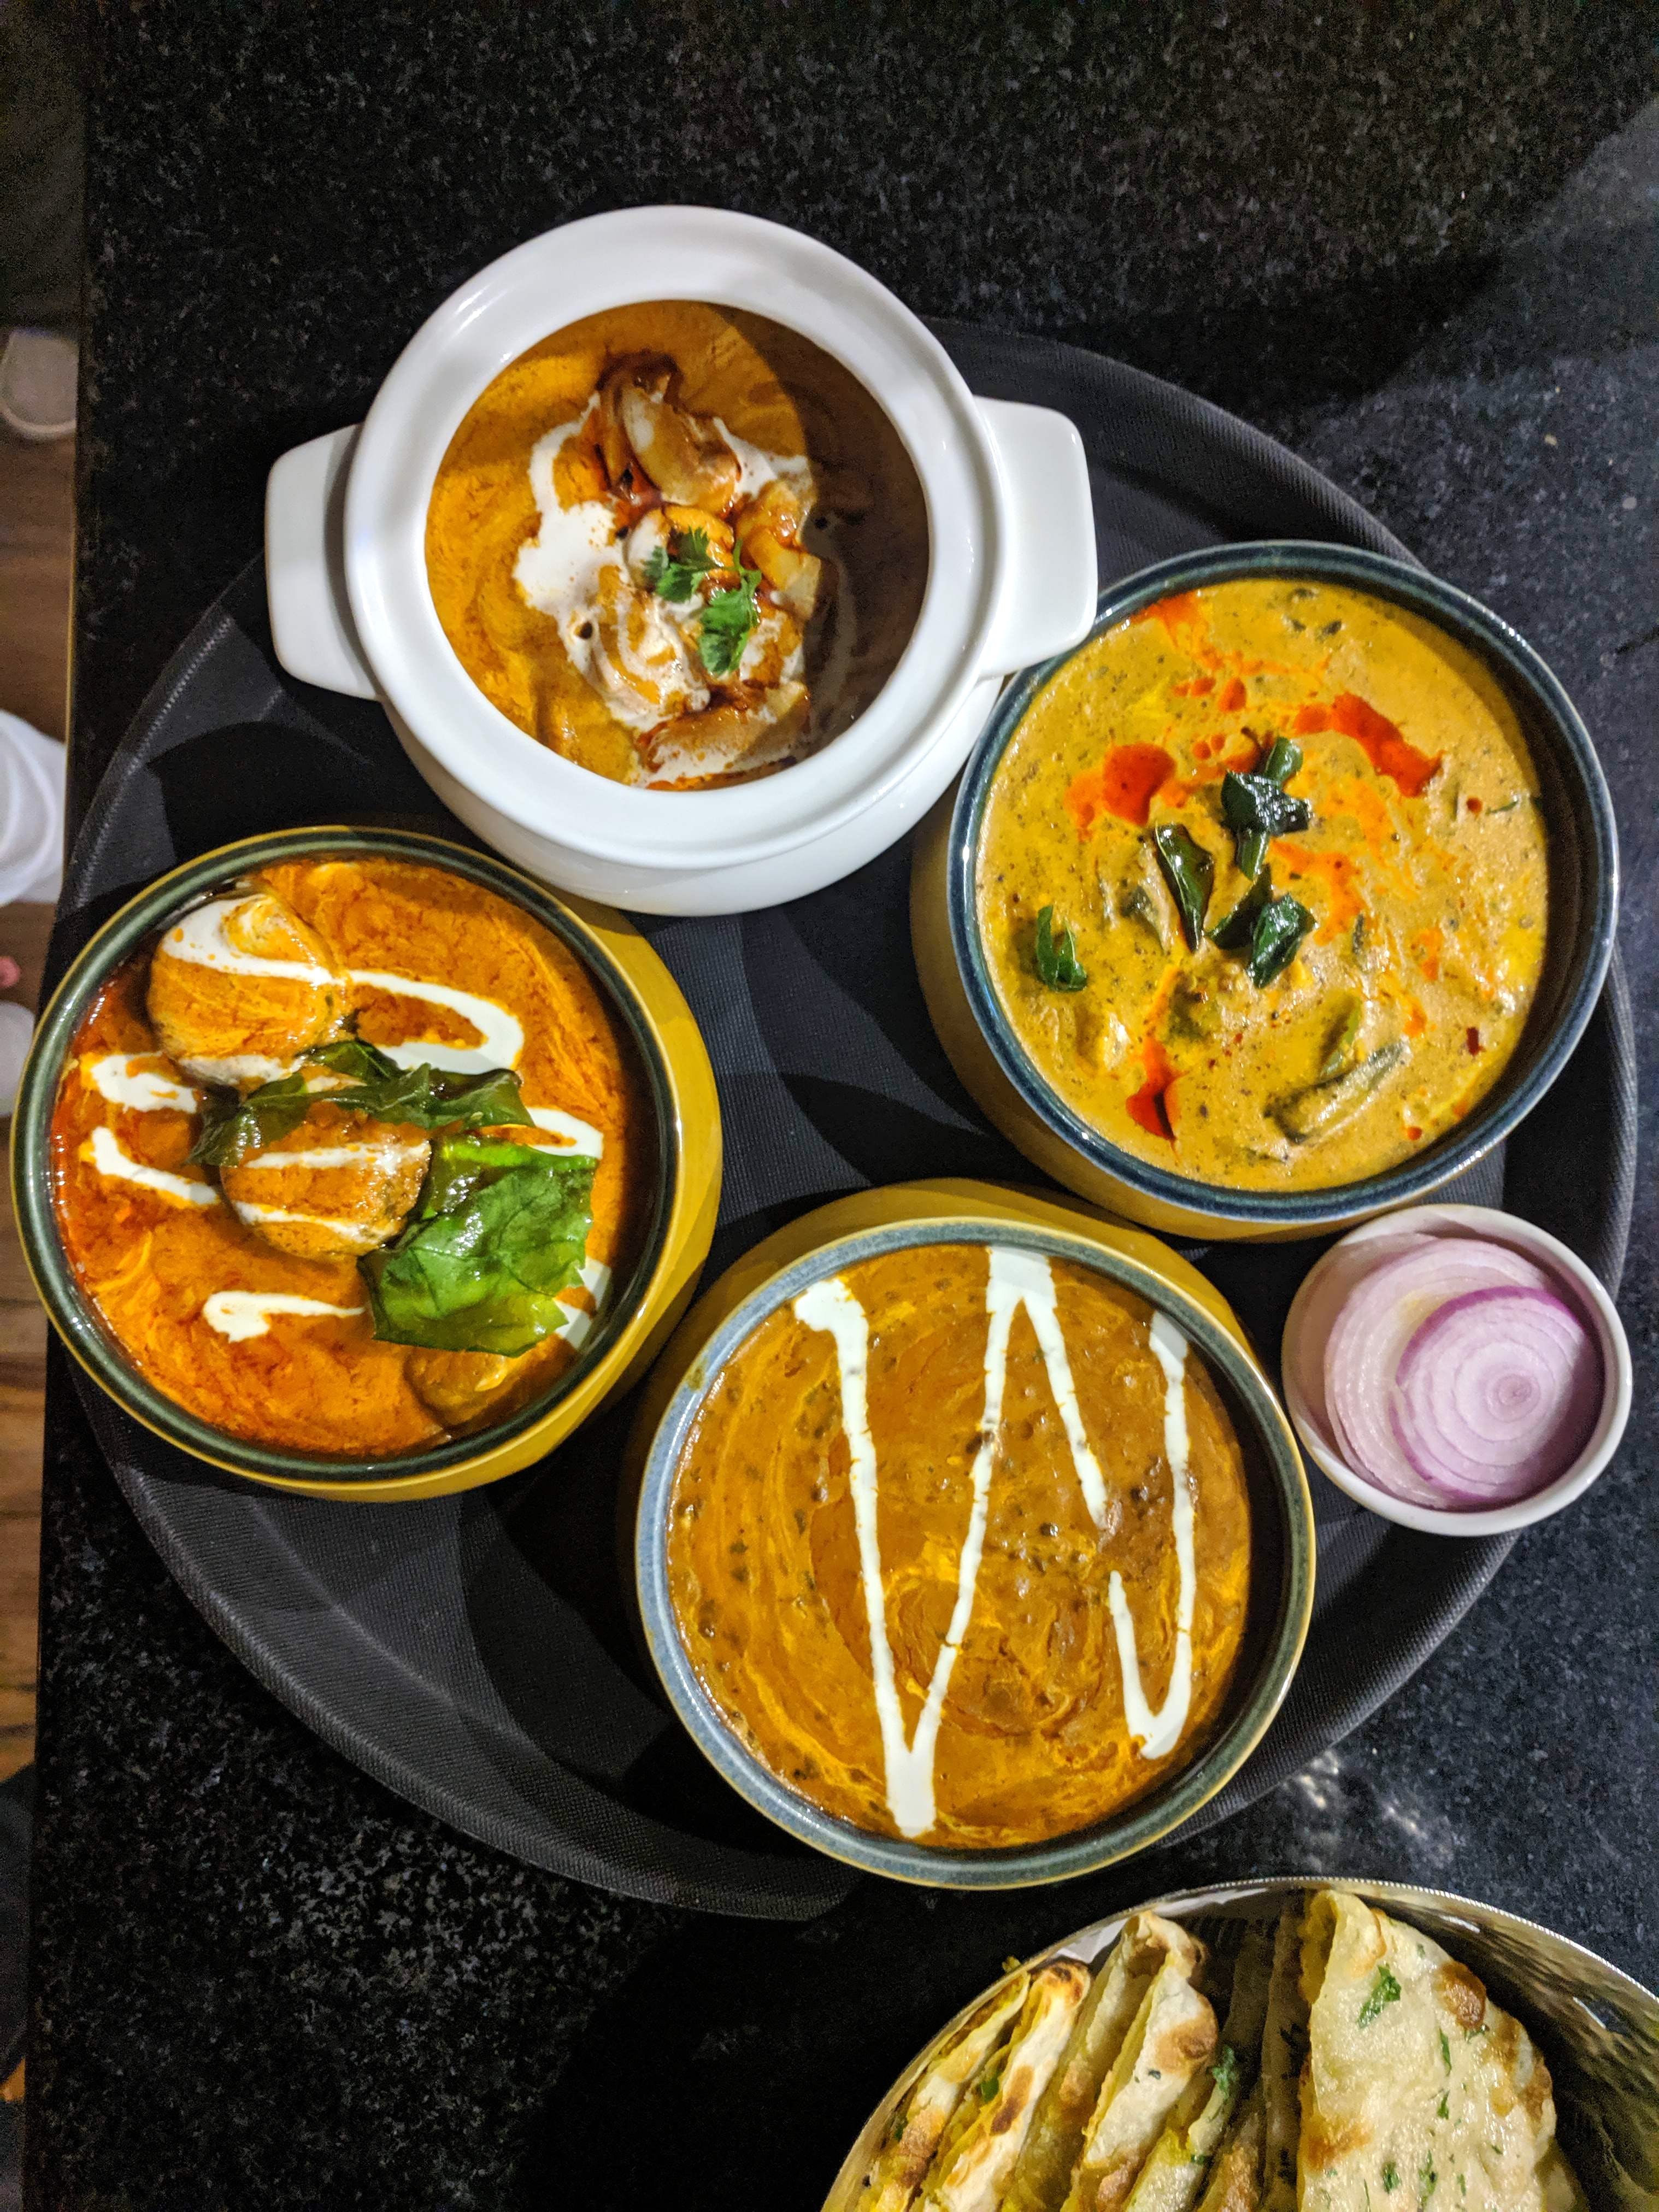 Dish,Food,Cuisine,Meal,Ingredient,Curry,Lunch,Produce,Indian cuisine,Kare-kare